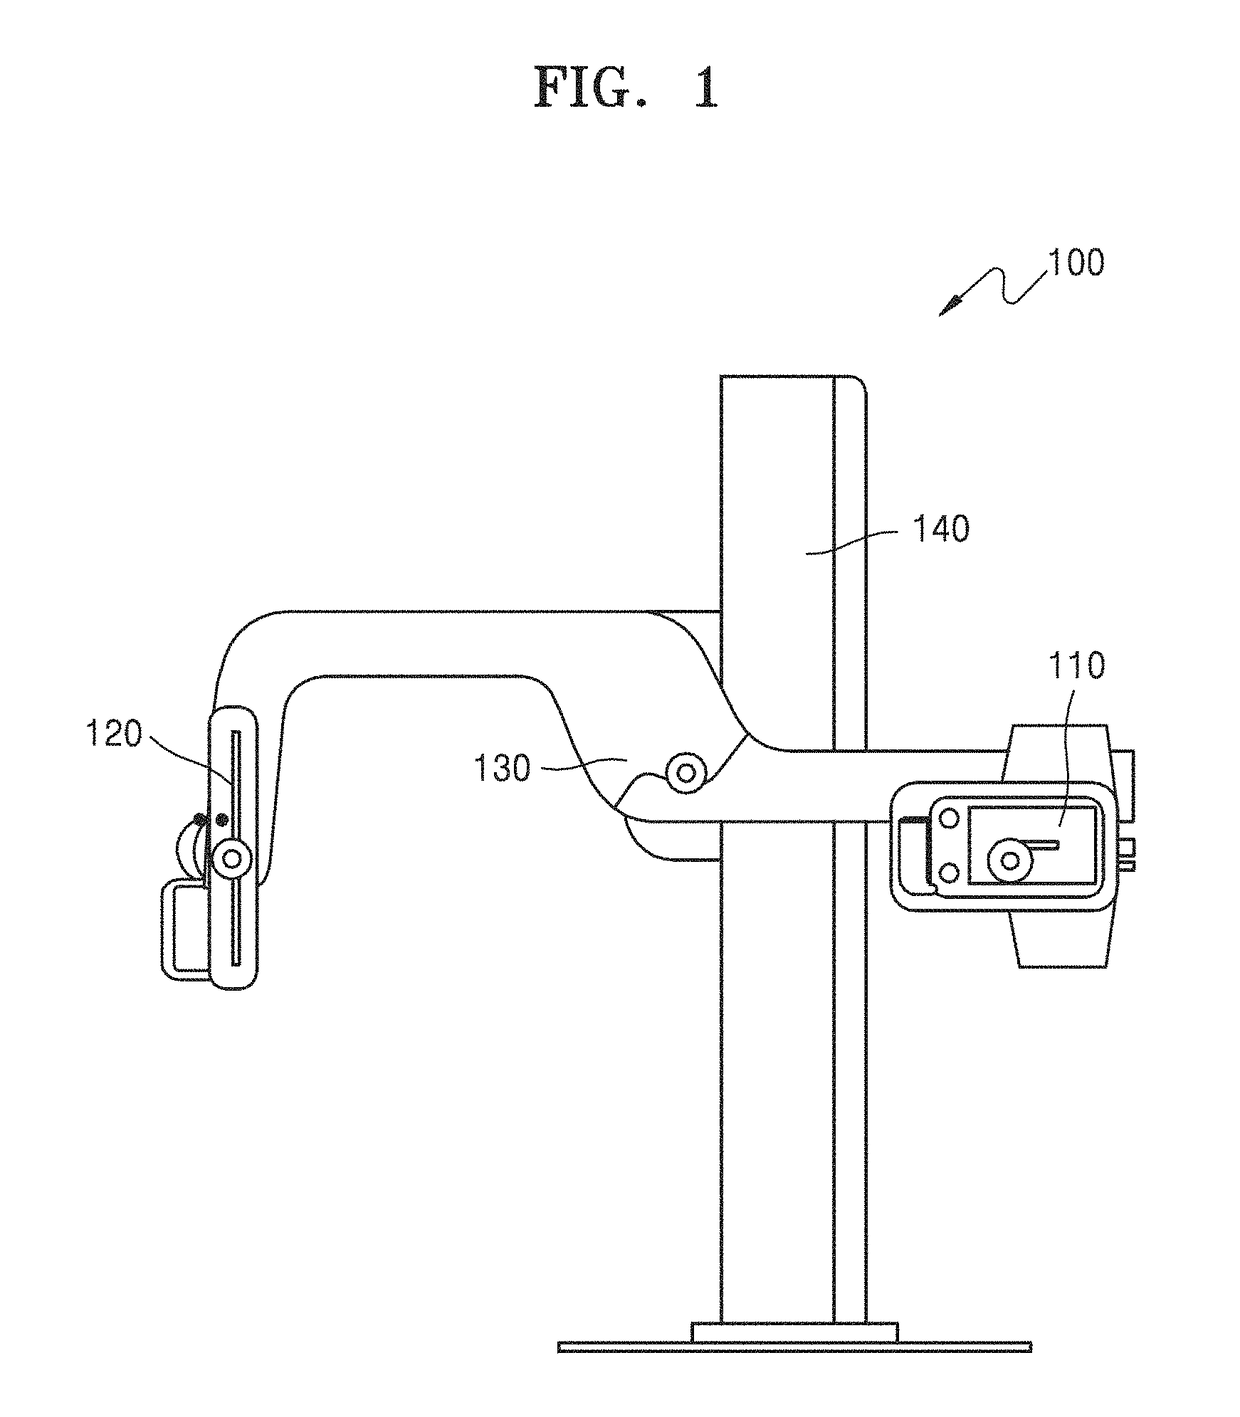 X-ray apparatus and method of capturing X-ray image